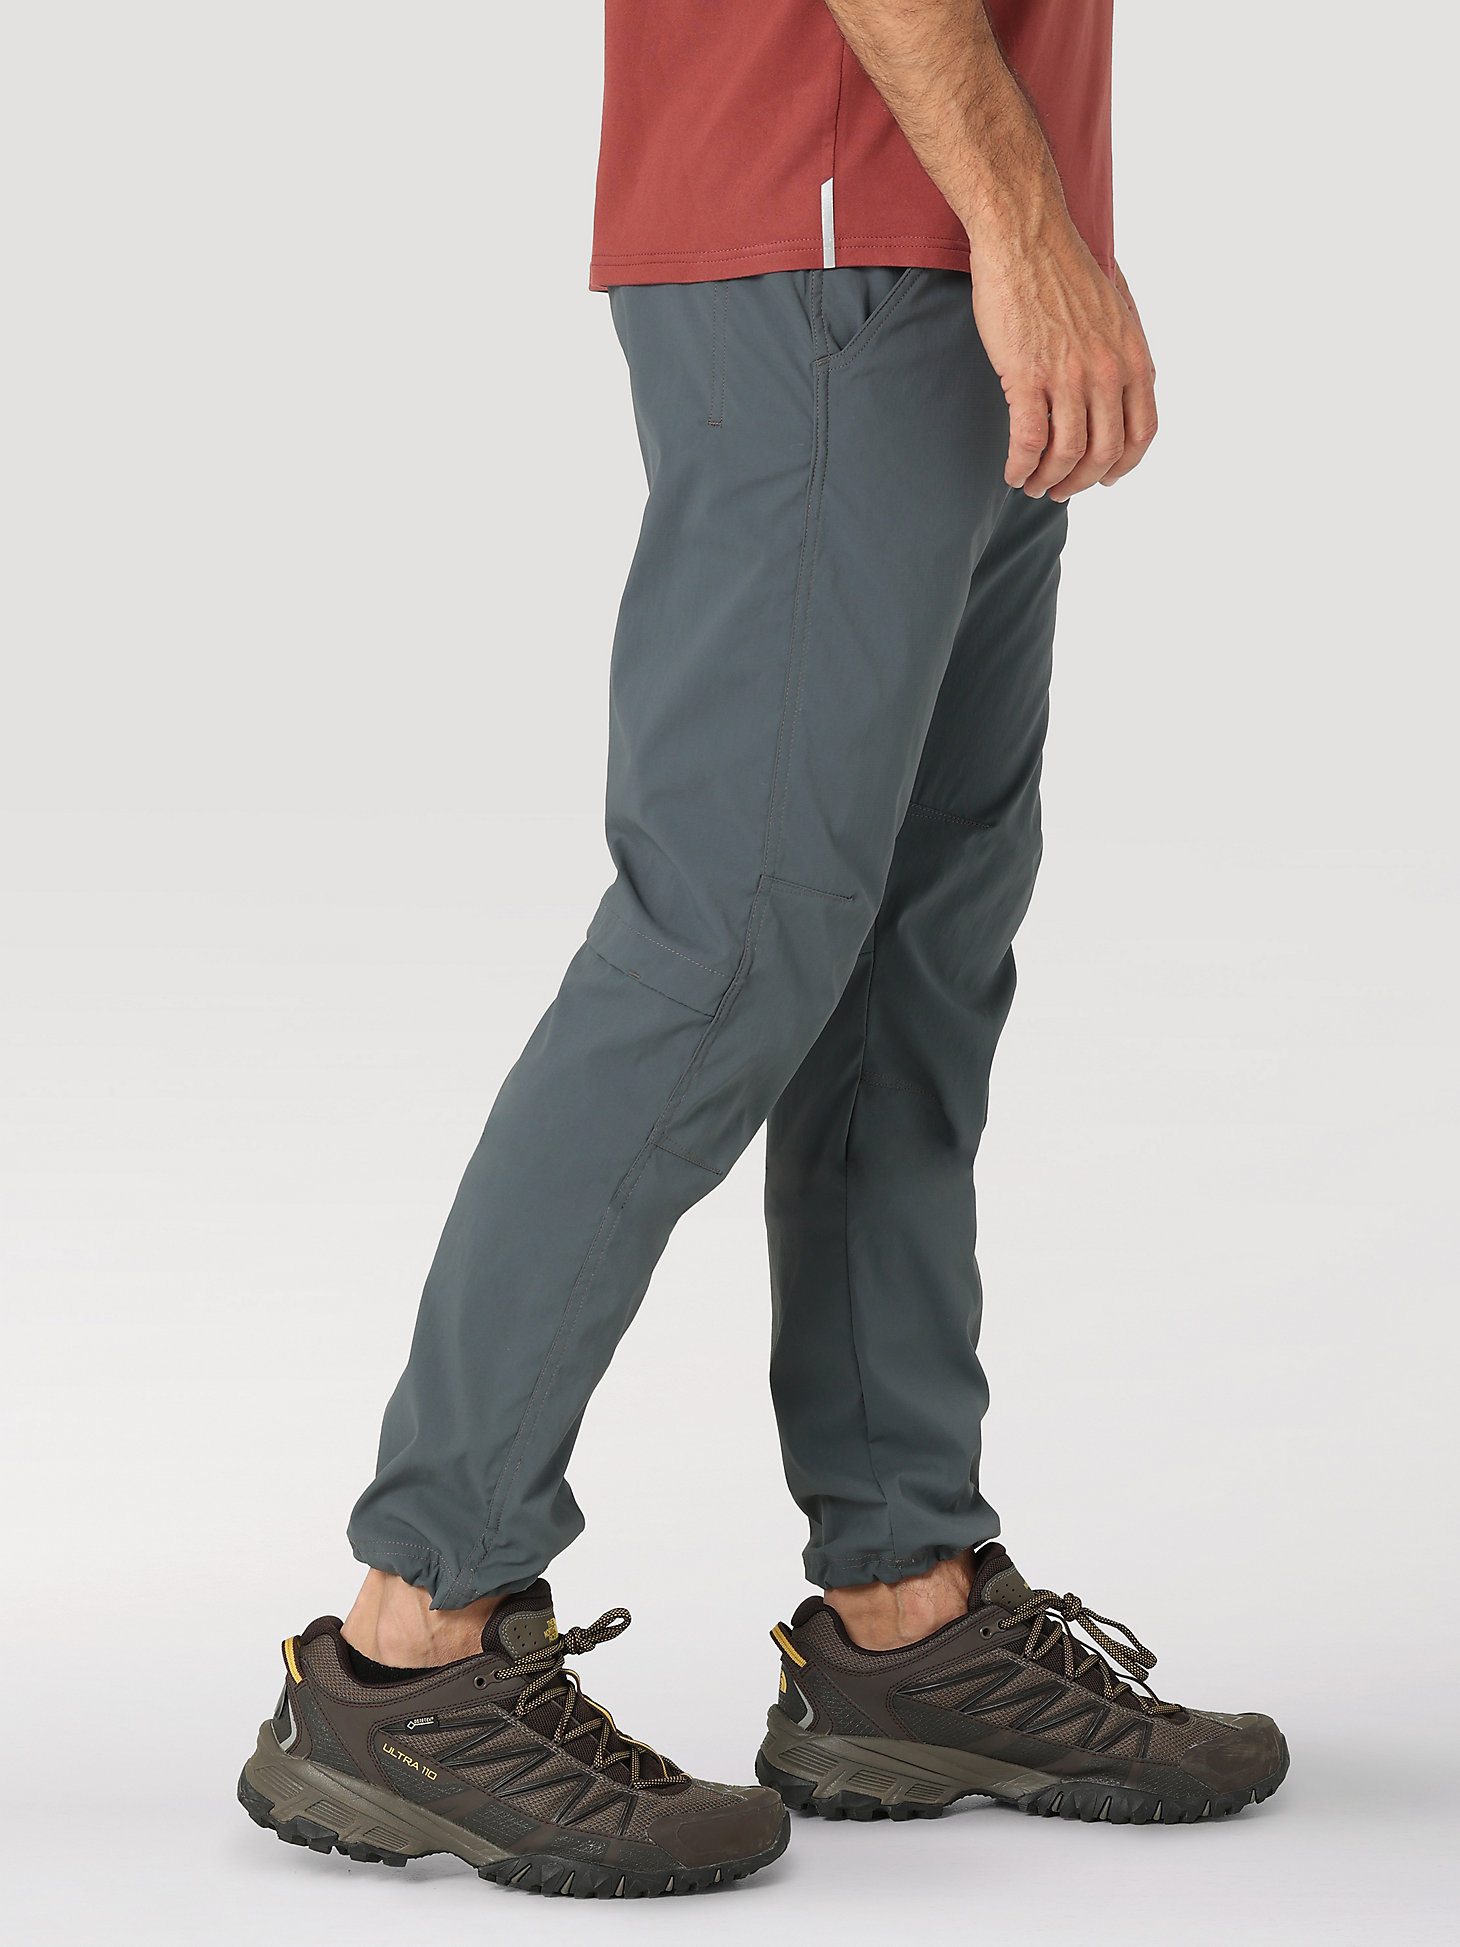 ATG by Wrangler™ Men's Convertible Trail Jogger in Iron Gate alternative view 4